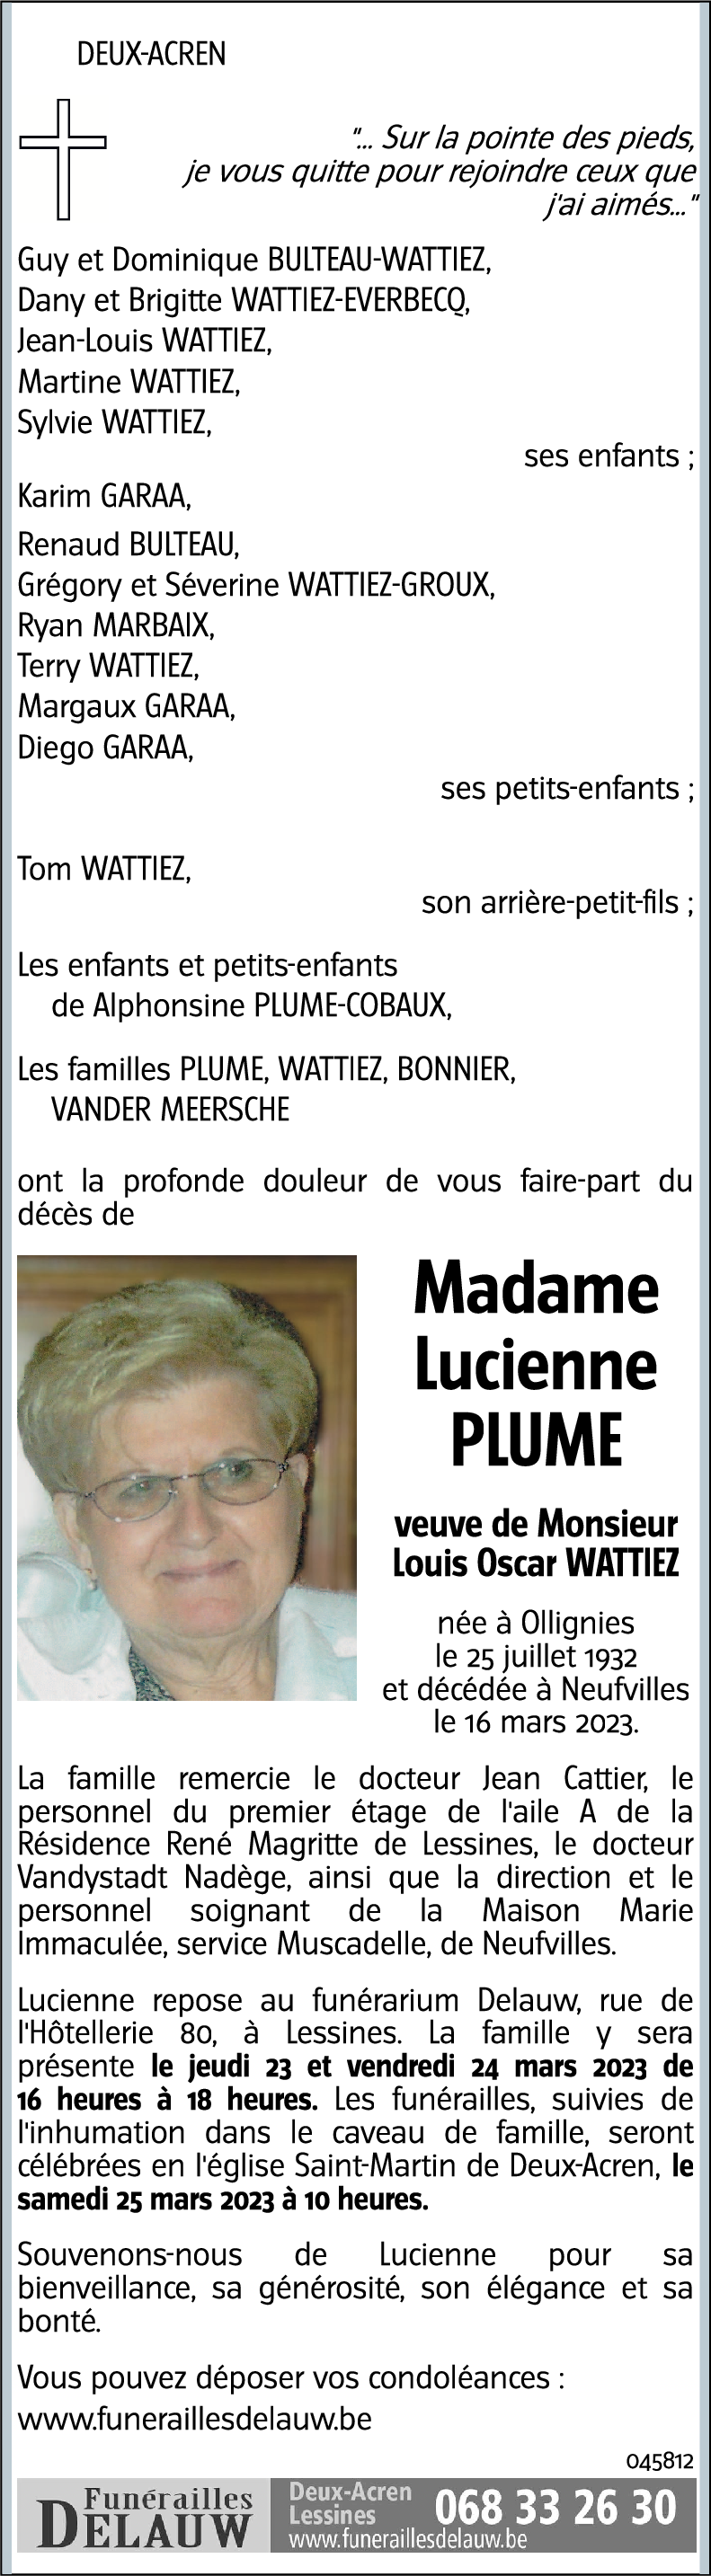 Lucienne PLUME